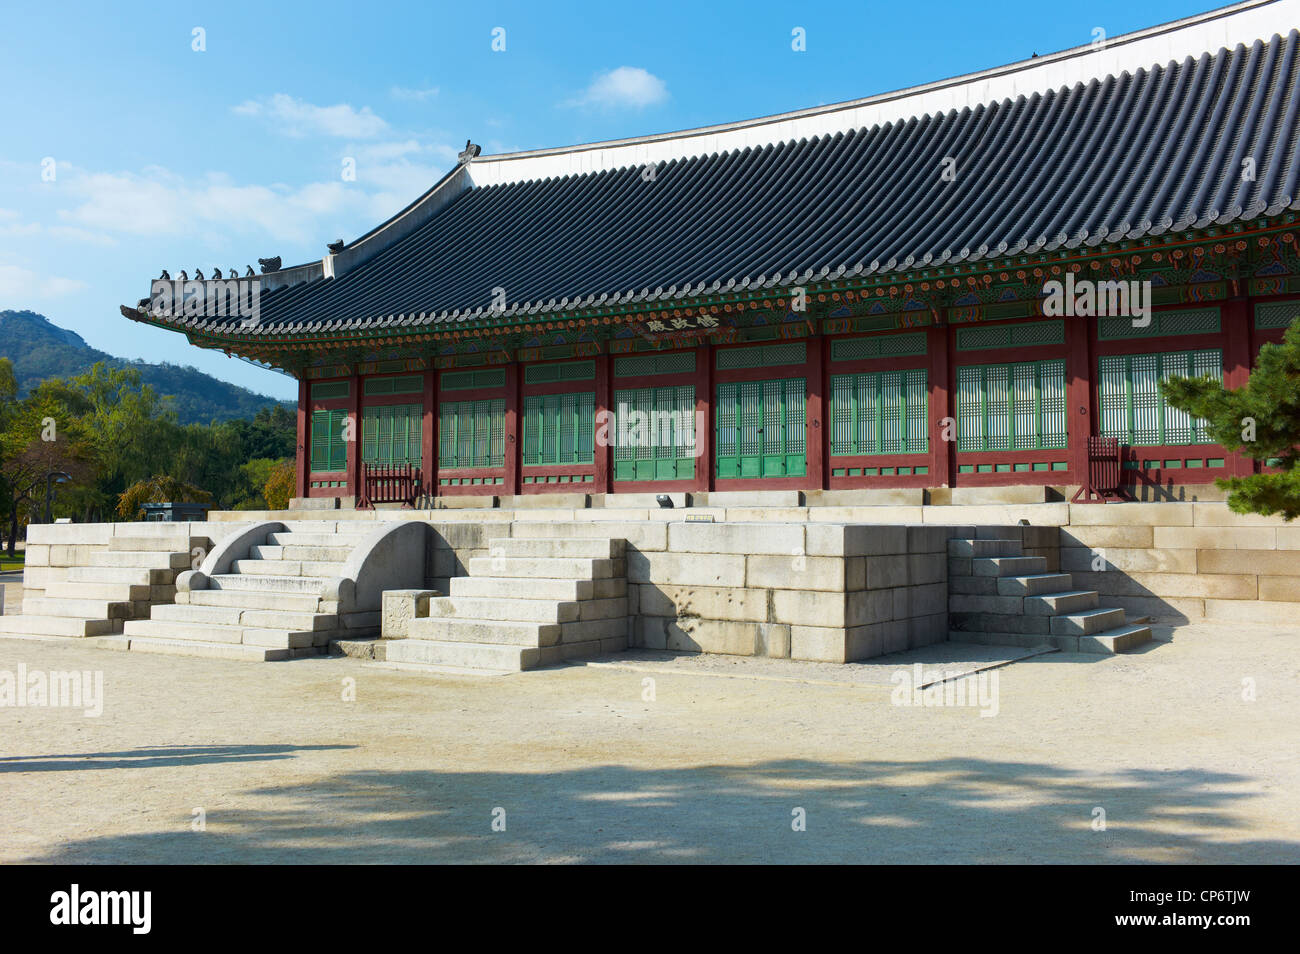 Architectural details in the Inner courtyard of the Grand Palace (Gyeongbokgung Palace) in Seoul, Korea. Stock Photo